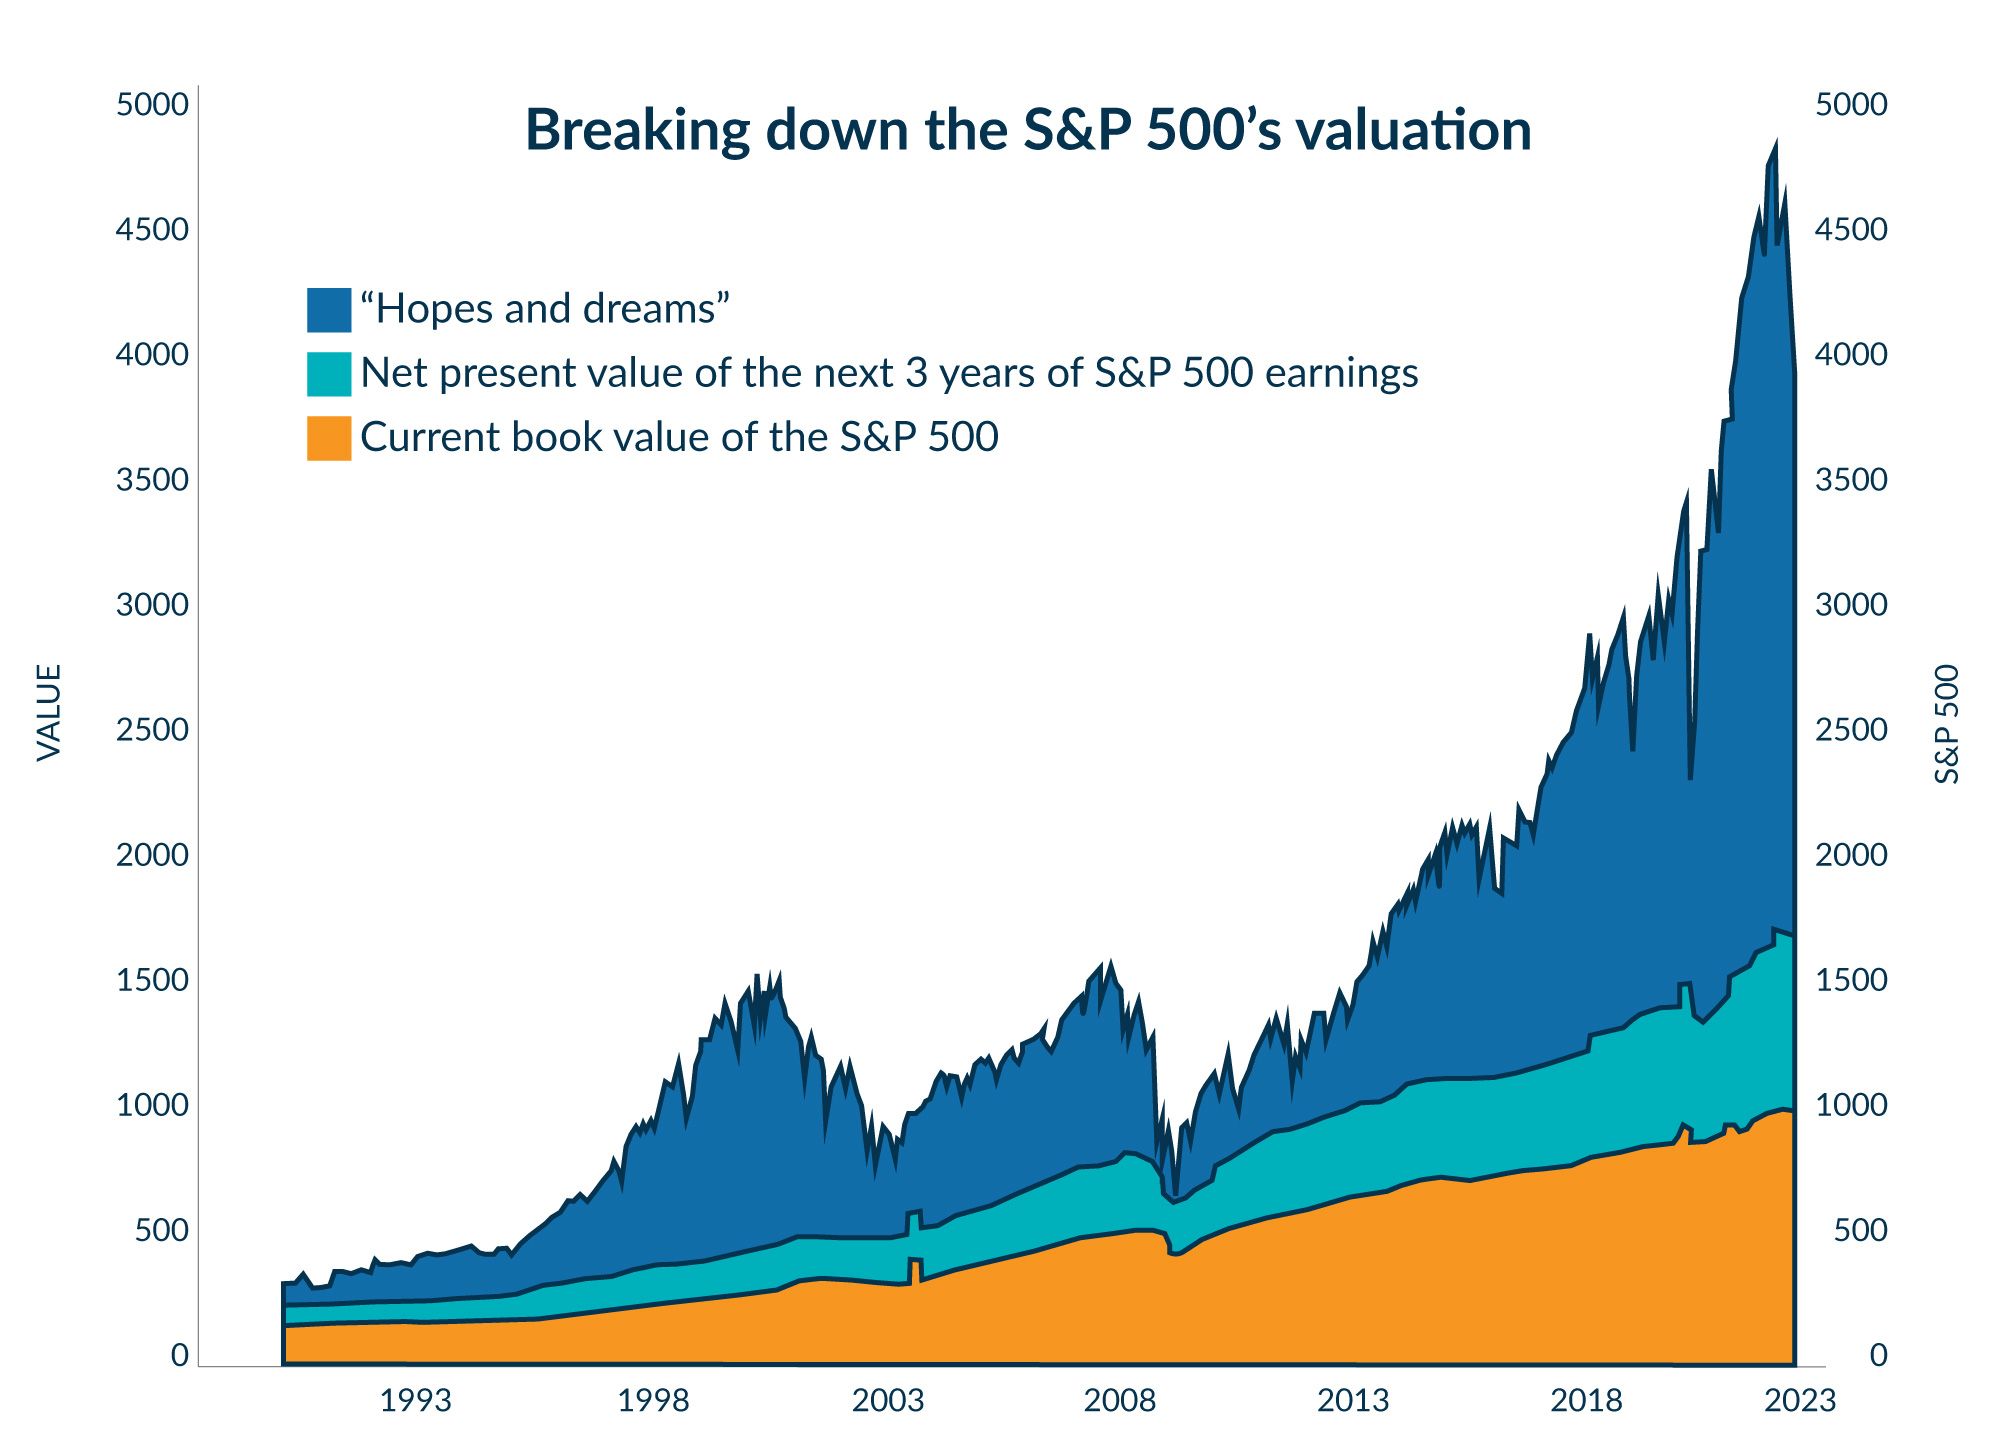 Breaking down the S&P 500's valuation